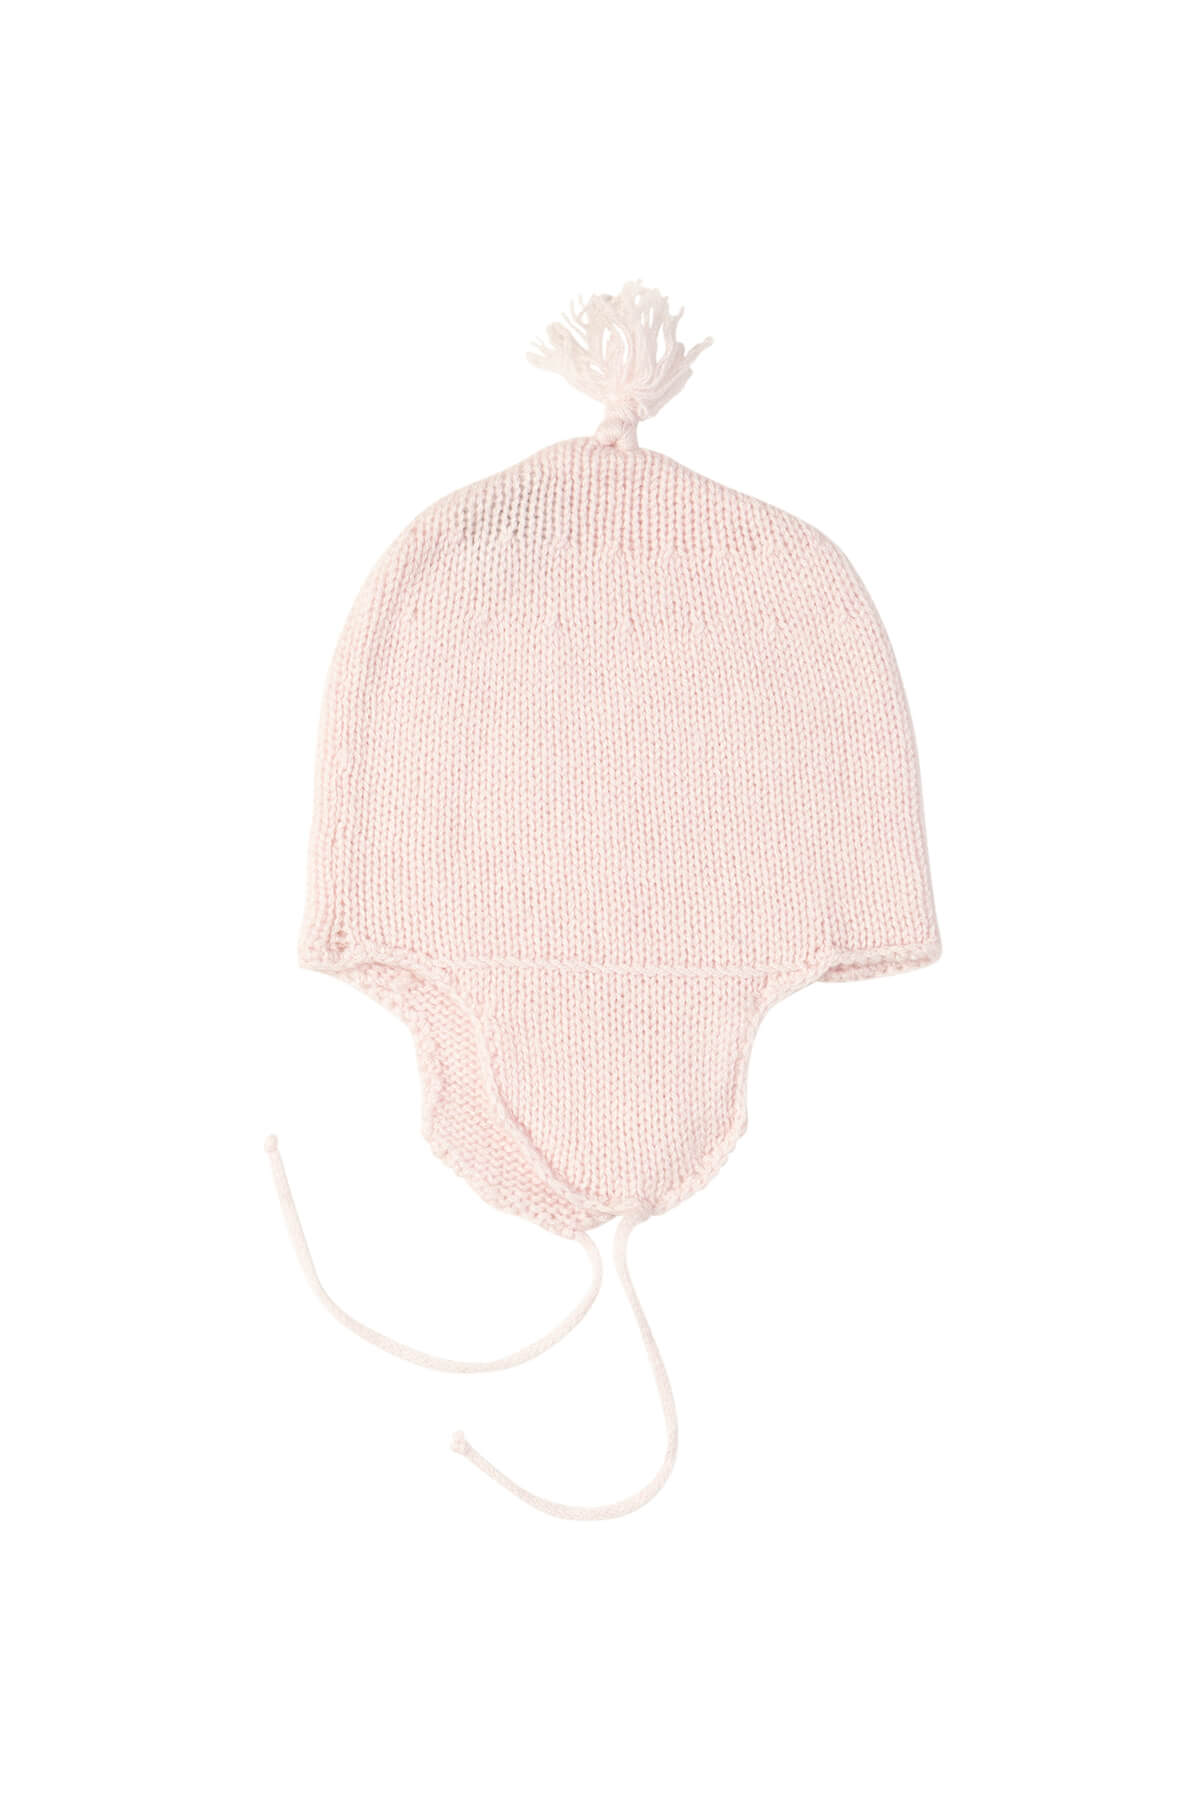 Johnstons of Elgin Hand Knitted Cashmere Baby Hat with Hand Crocheted Details in Blush on white background 61709P191ONE